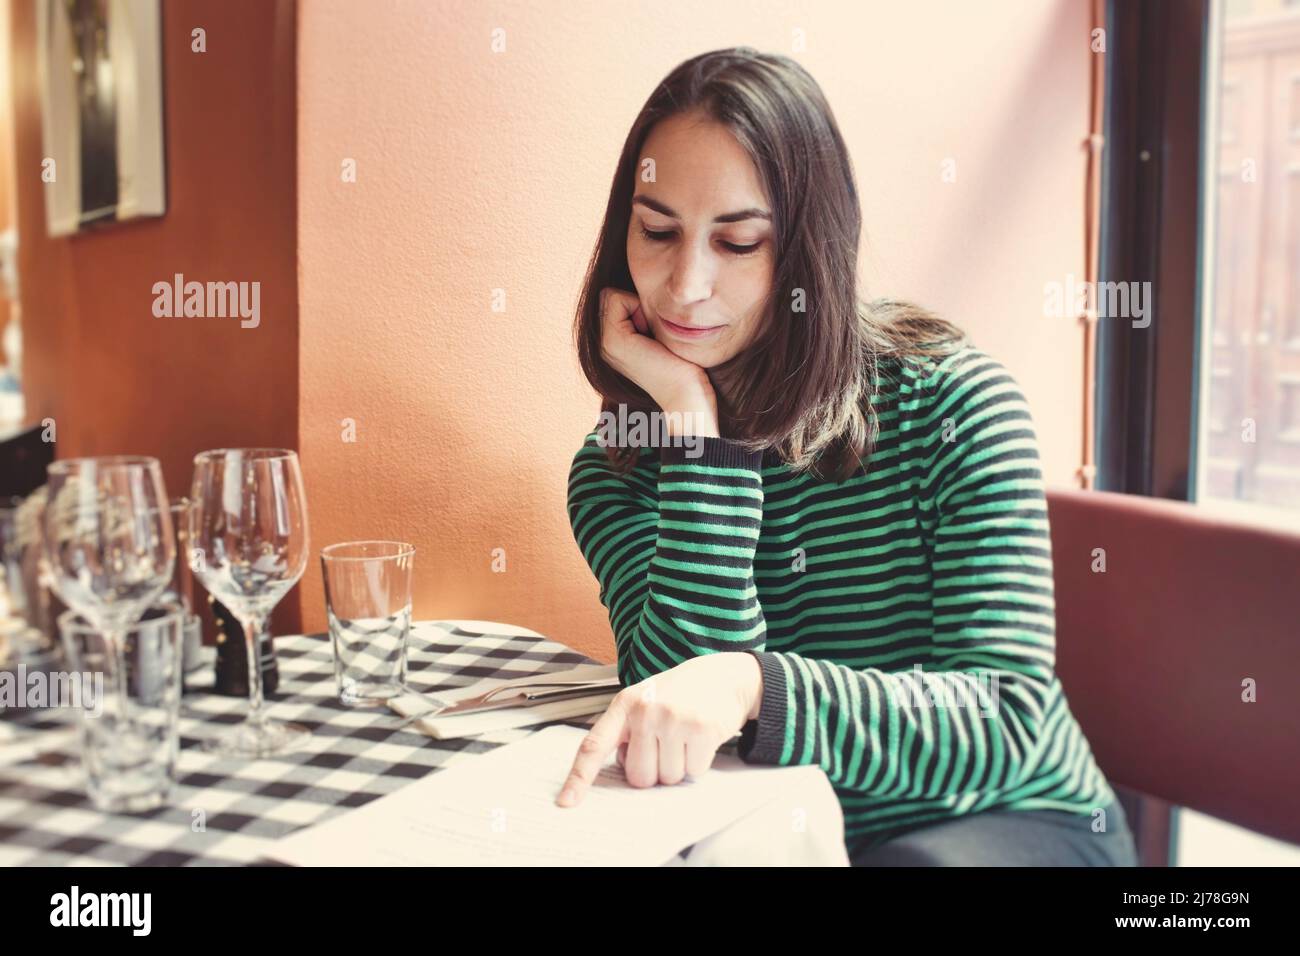 One attractive young lady sat at a table reading the menu in a bistro restaurant on her own Stock Photo